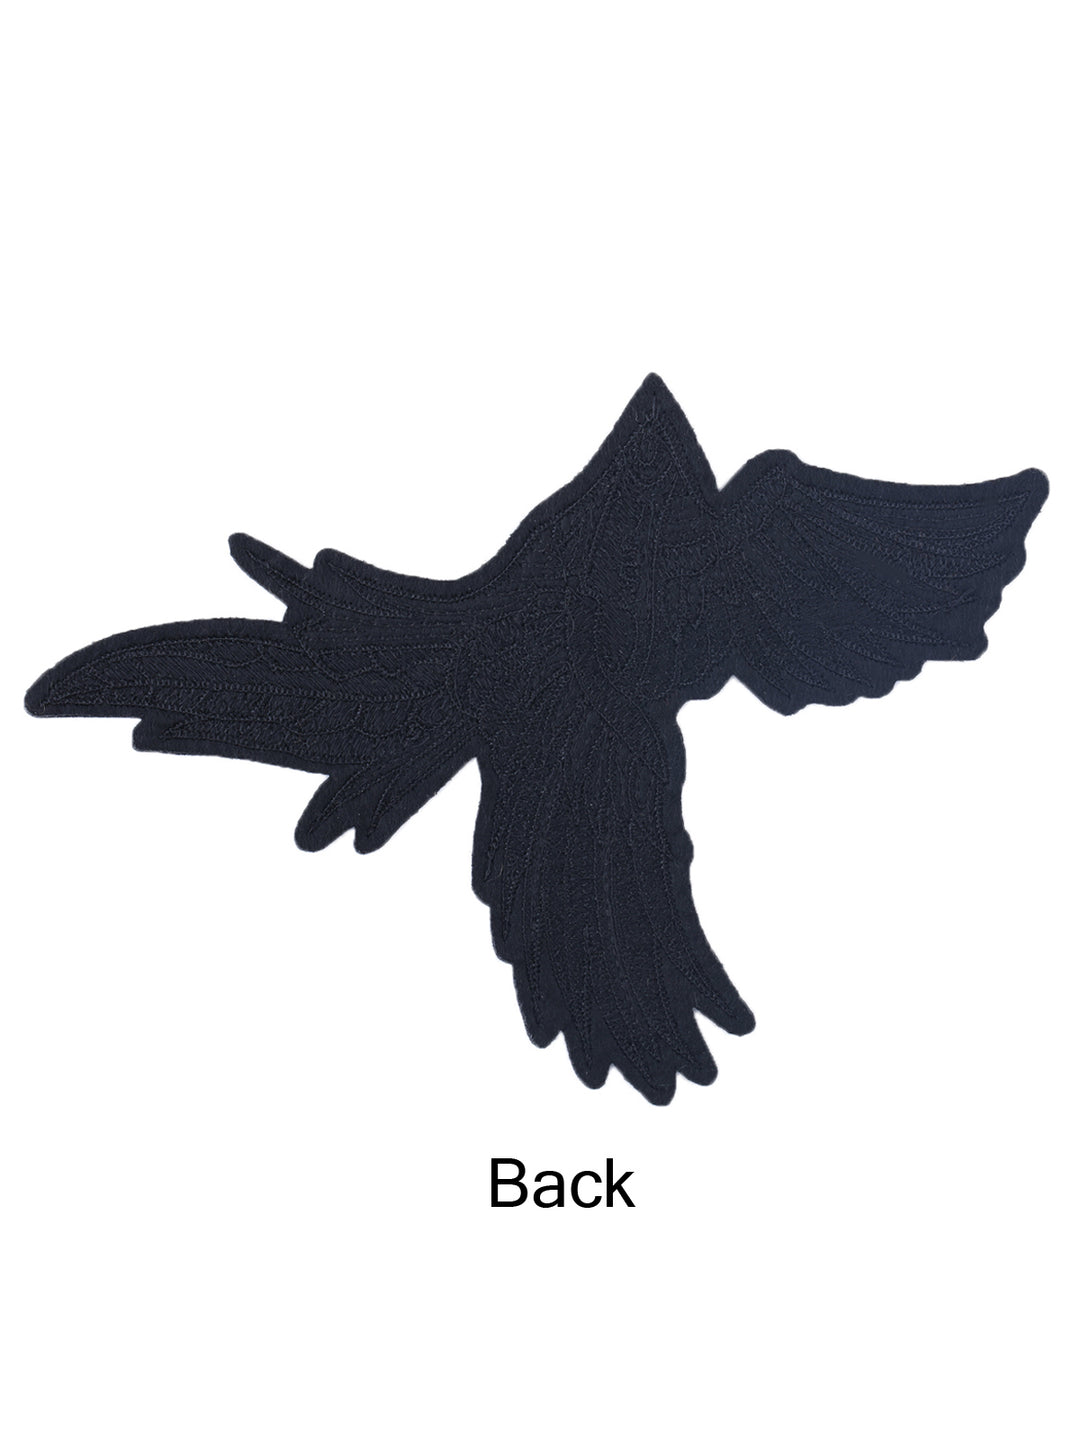 Embroidered Black Bird Beaded Patch